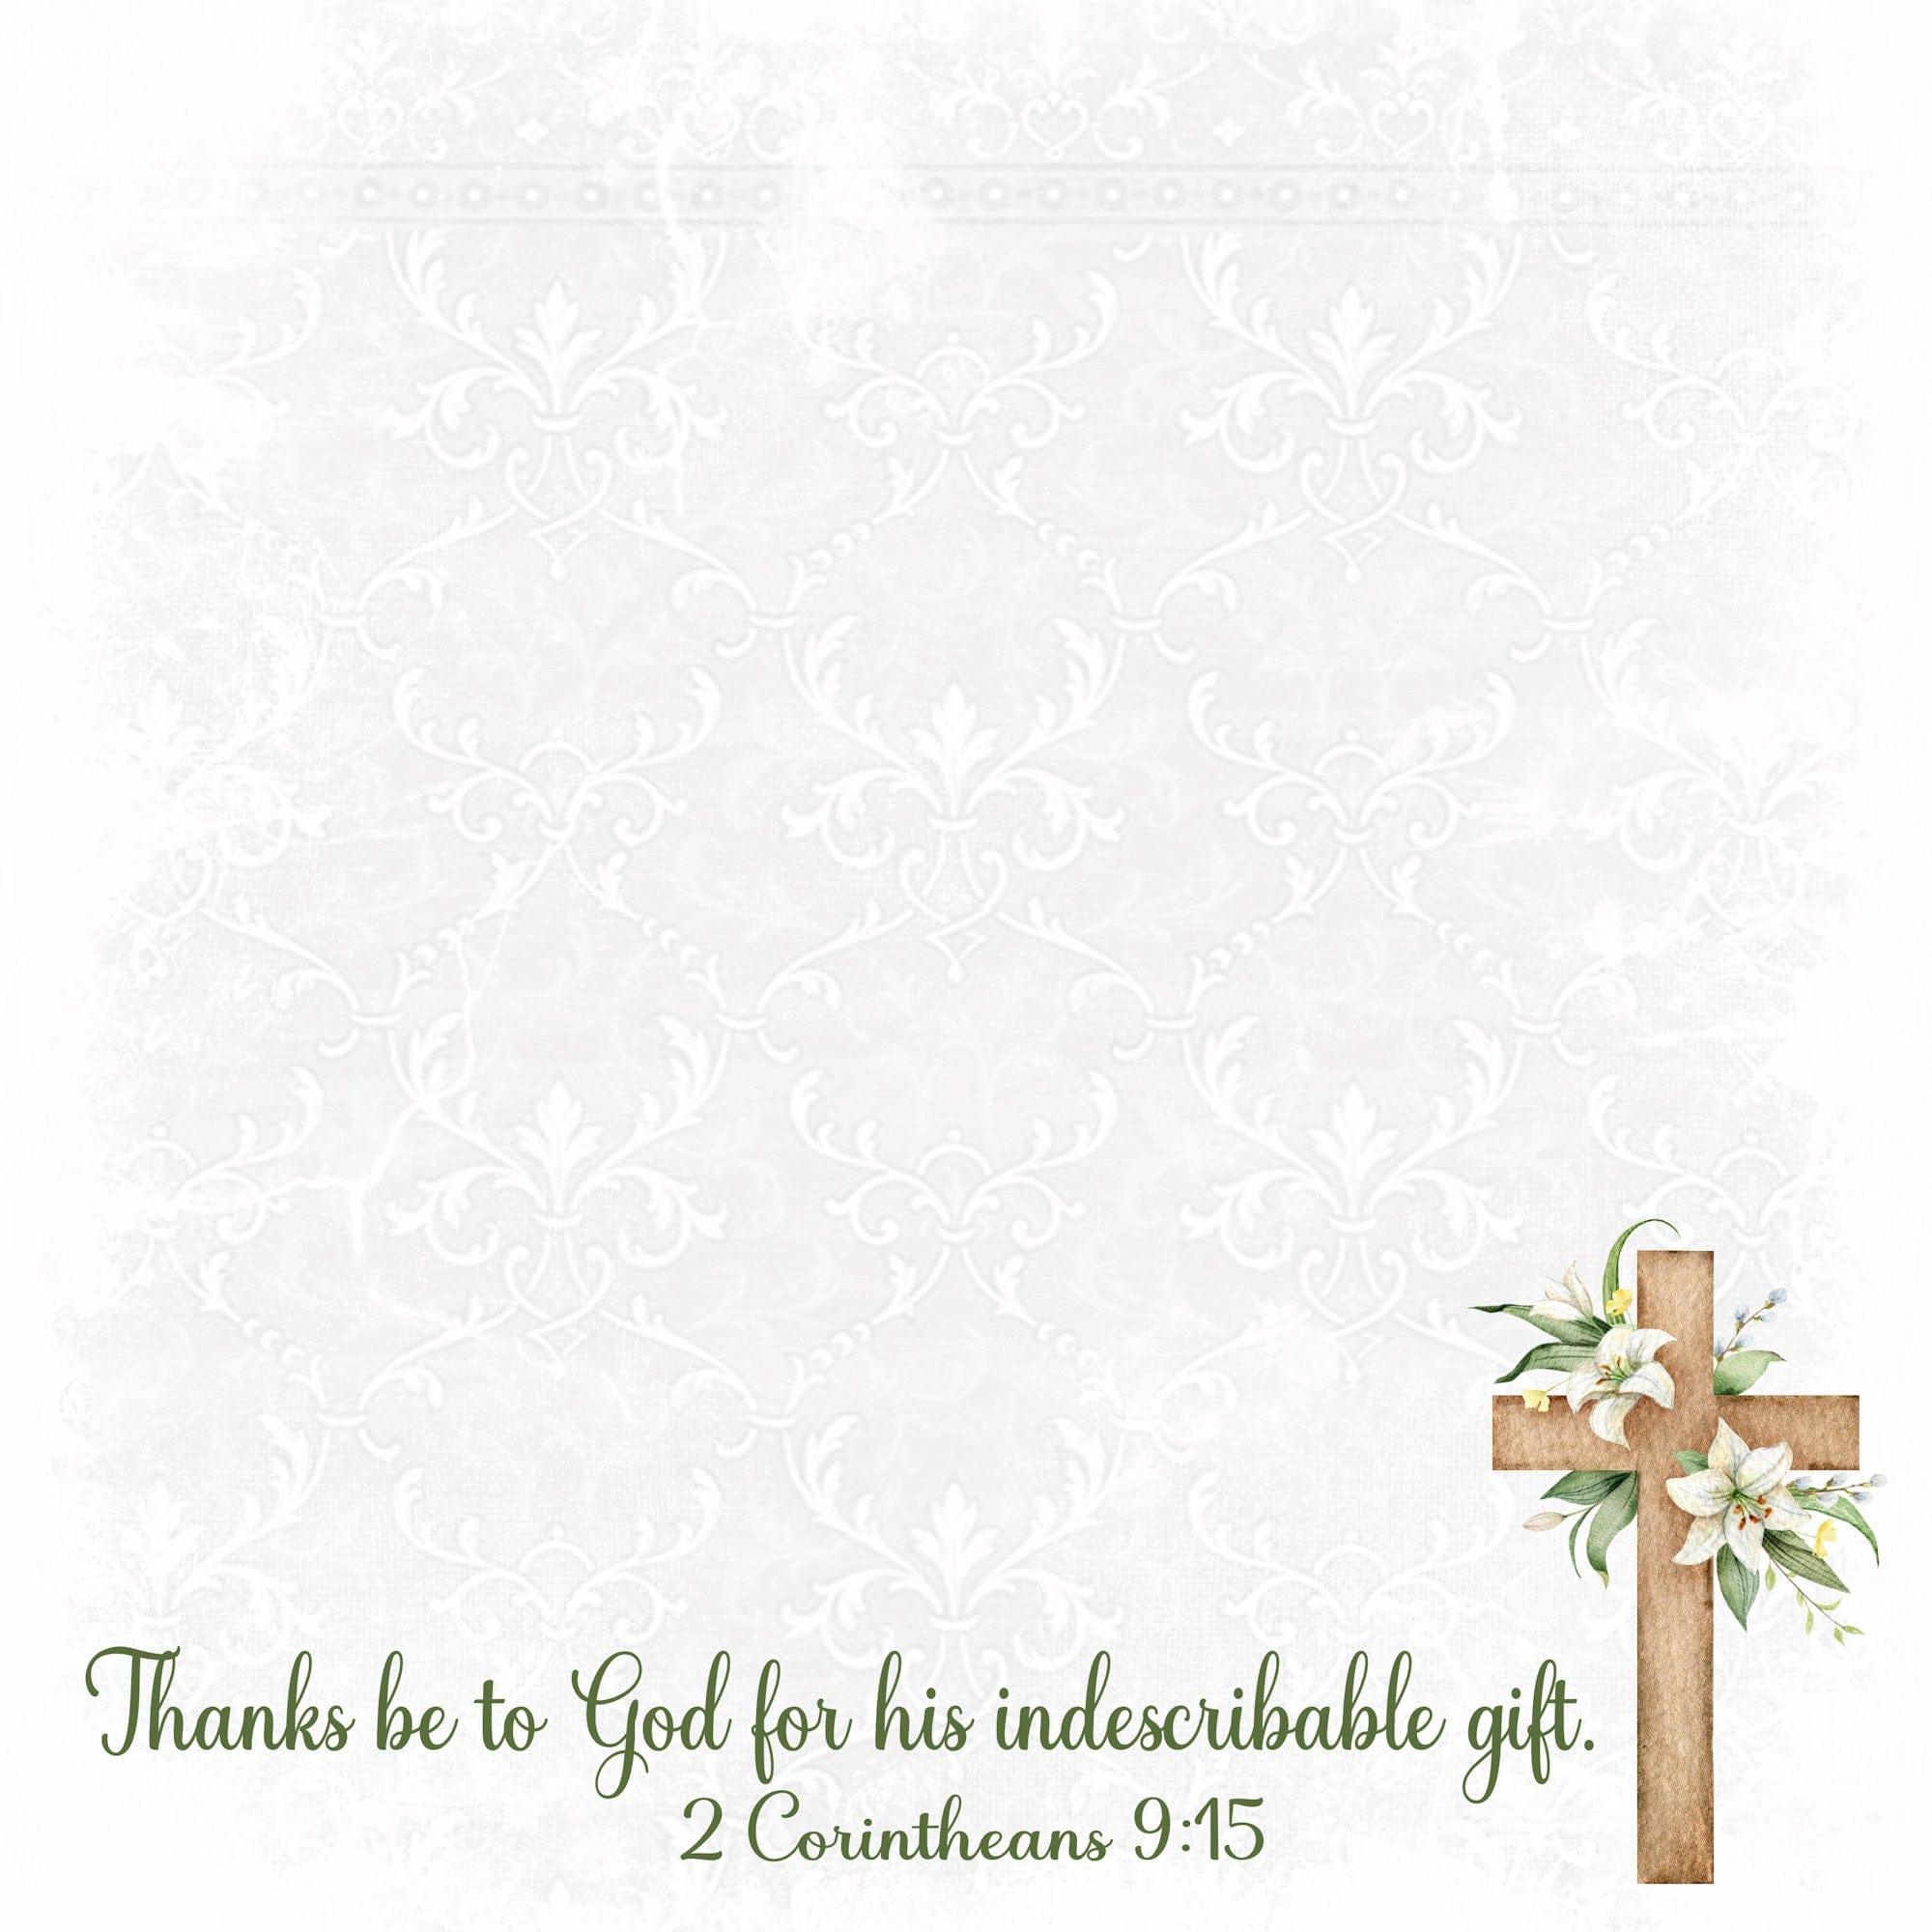 Holy Sacraments Collection Godparents 12 x 12 Double-Sided Scrapbook Paper by SSC Designs - Scrapbook Supply Companies